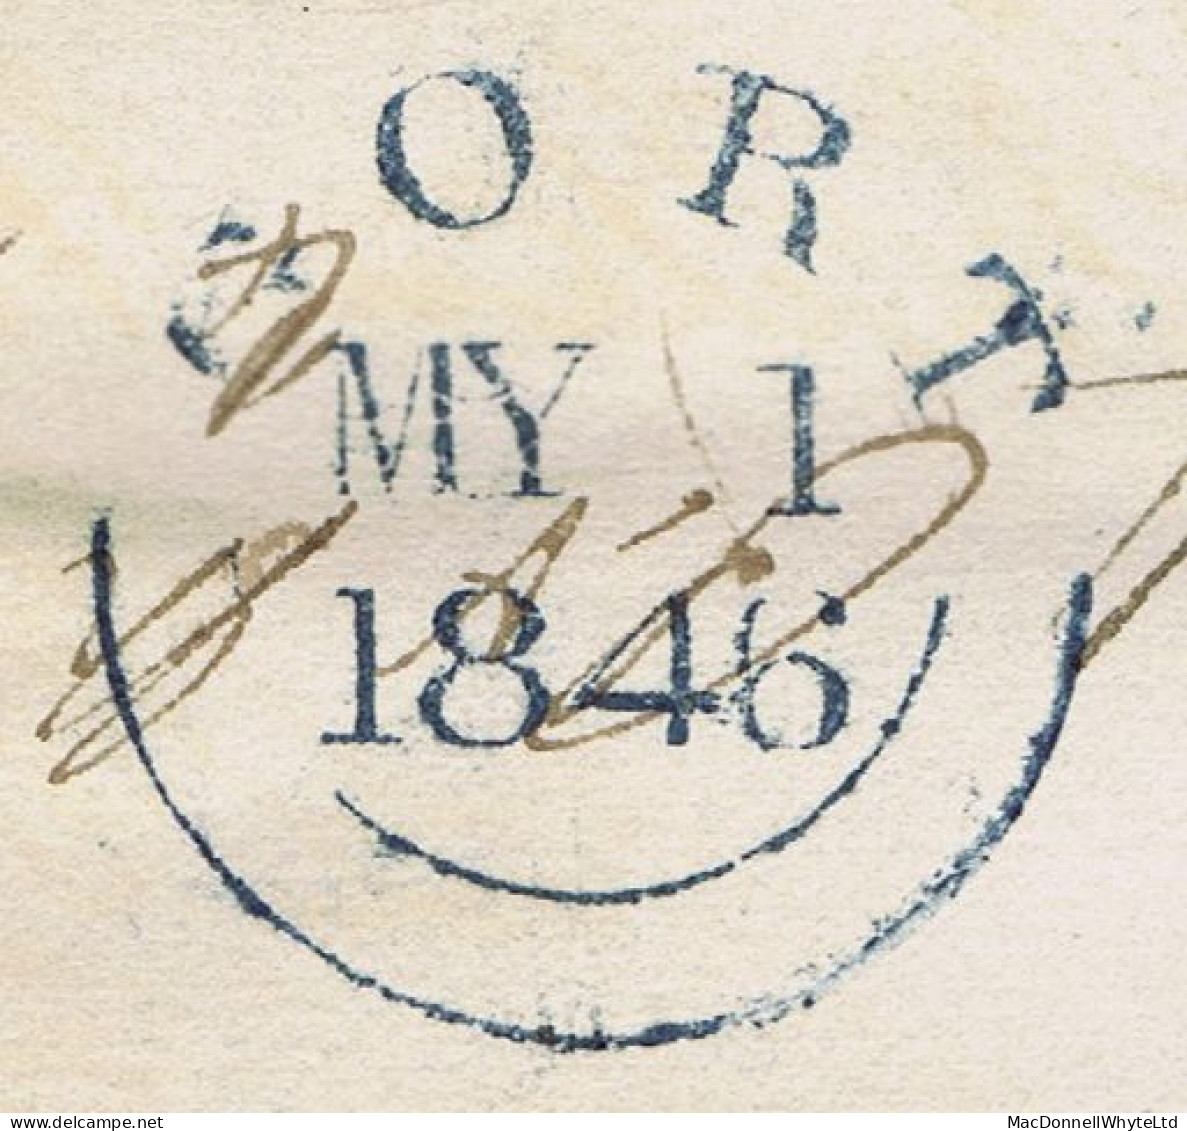 Ireland Galway Uniform Penny Post 1846 Cover To Military Dept London Boxed 2-line PAID AT GORT In Blue, GORT MY 1 1846 - Voorfilatelie